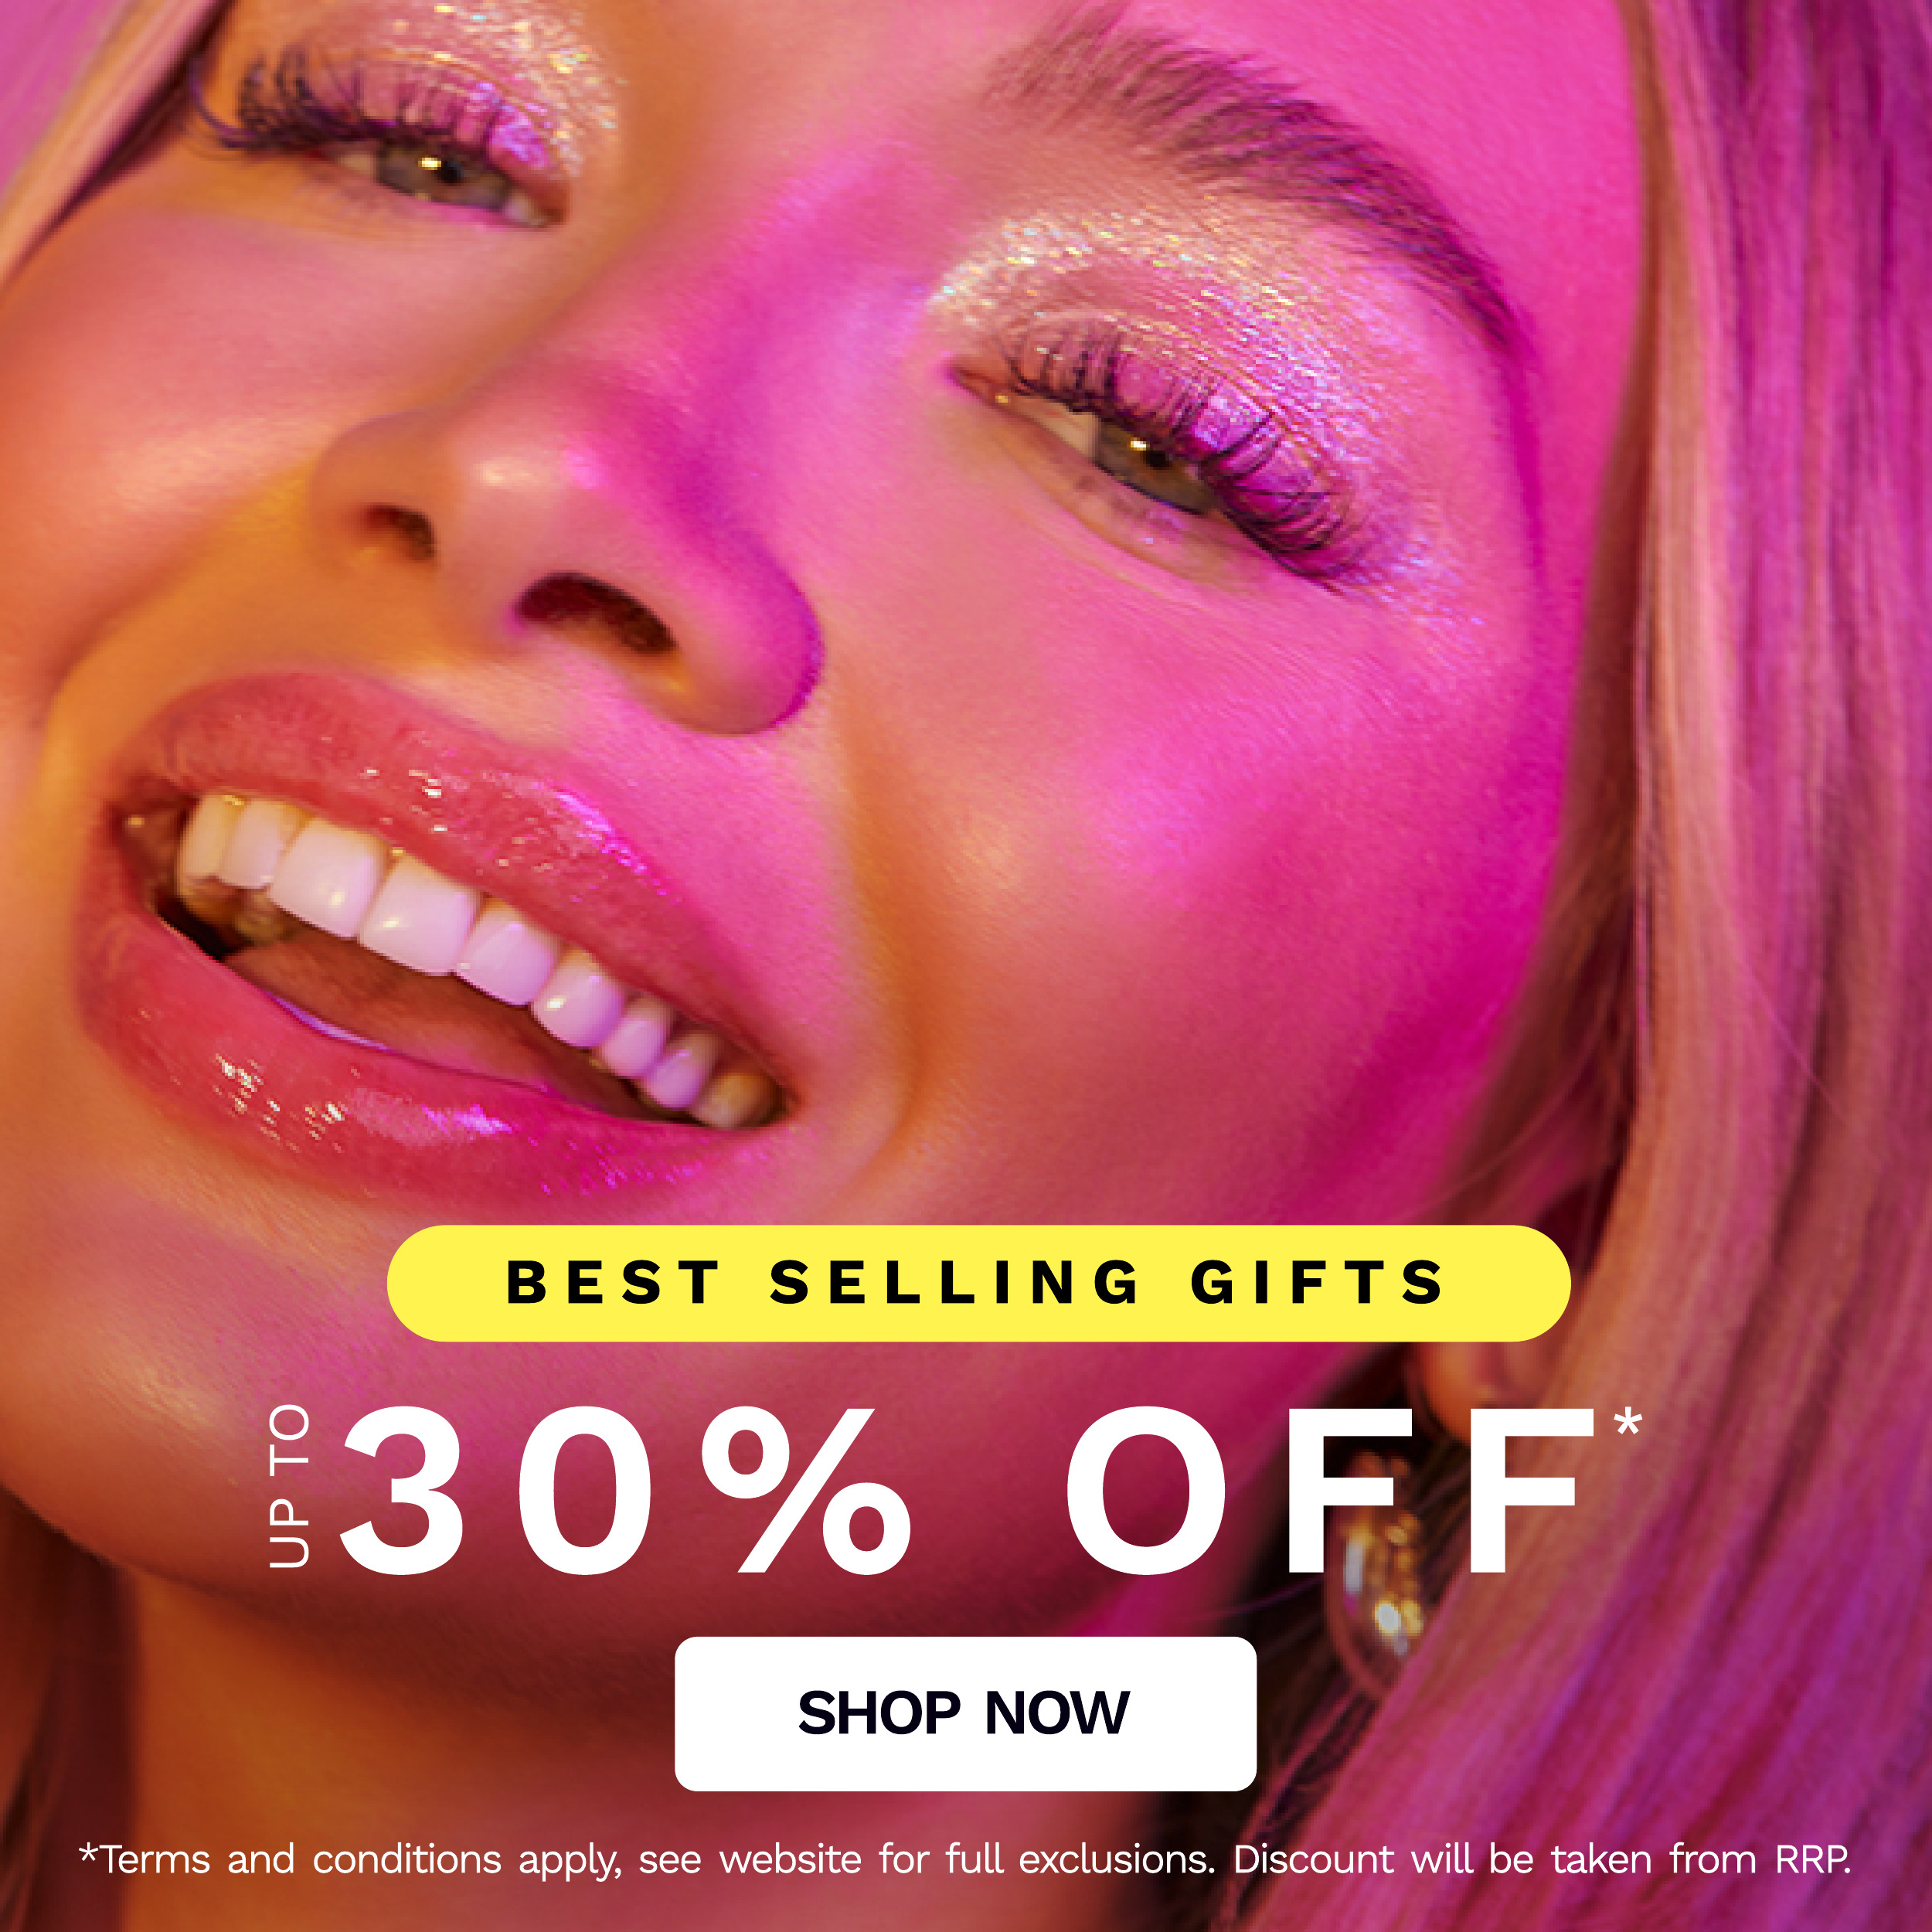 Up to 30 percent off gifts